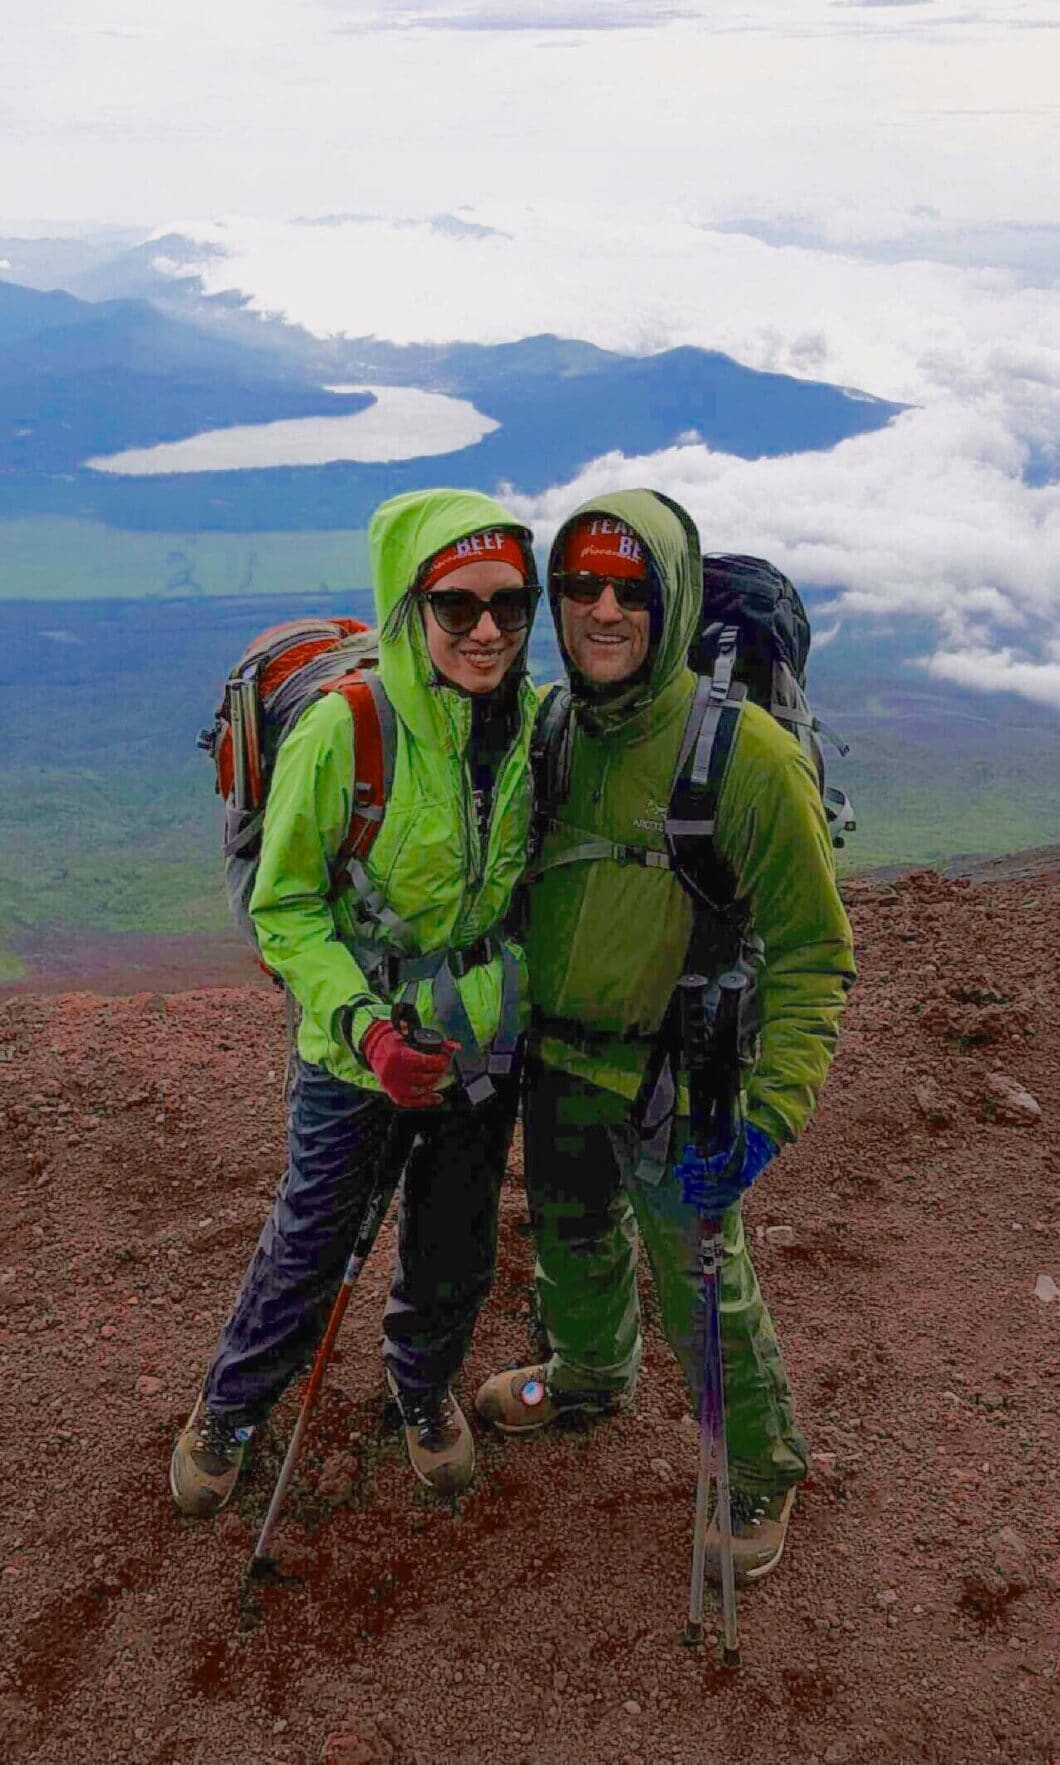 Climbing Mount Fuji – Everything You Need to Know Before You Go